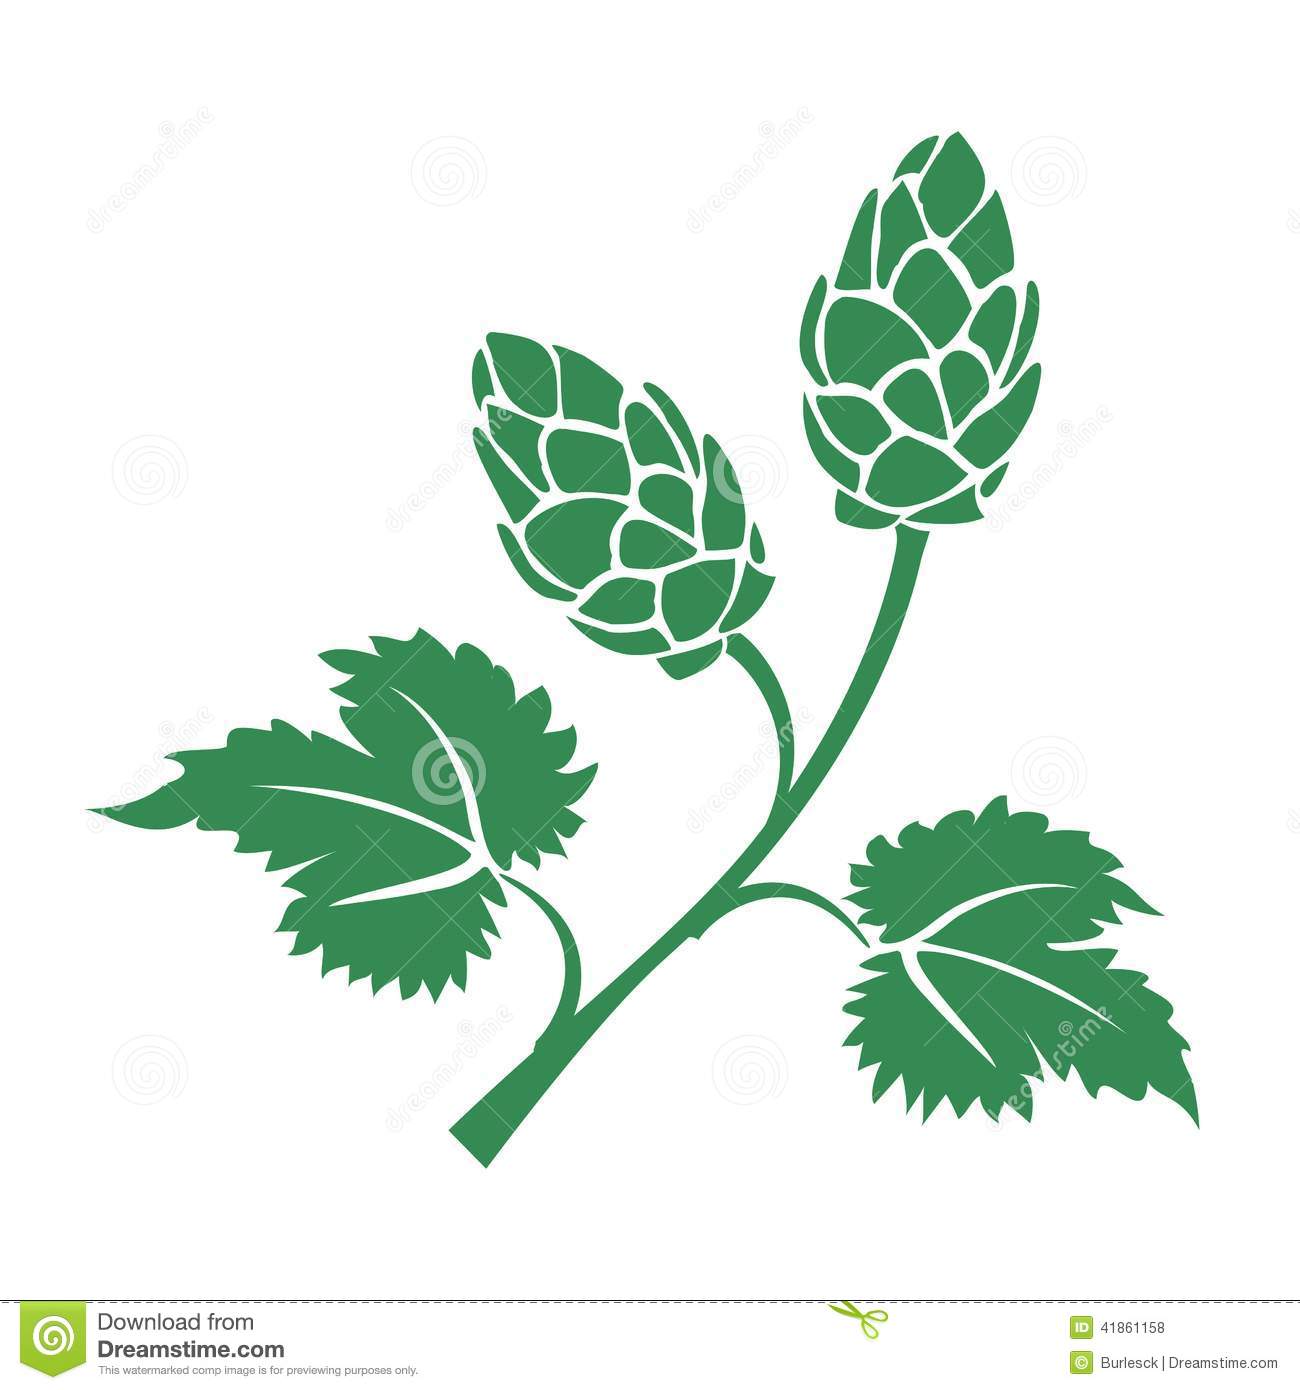 Green Vector Silhouette Hops Icon With Leaves And Cone Like Flowers